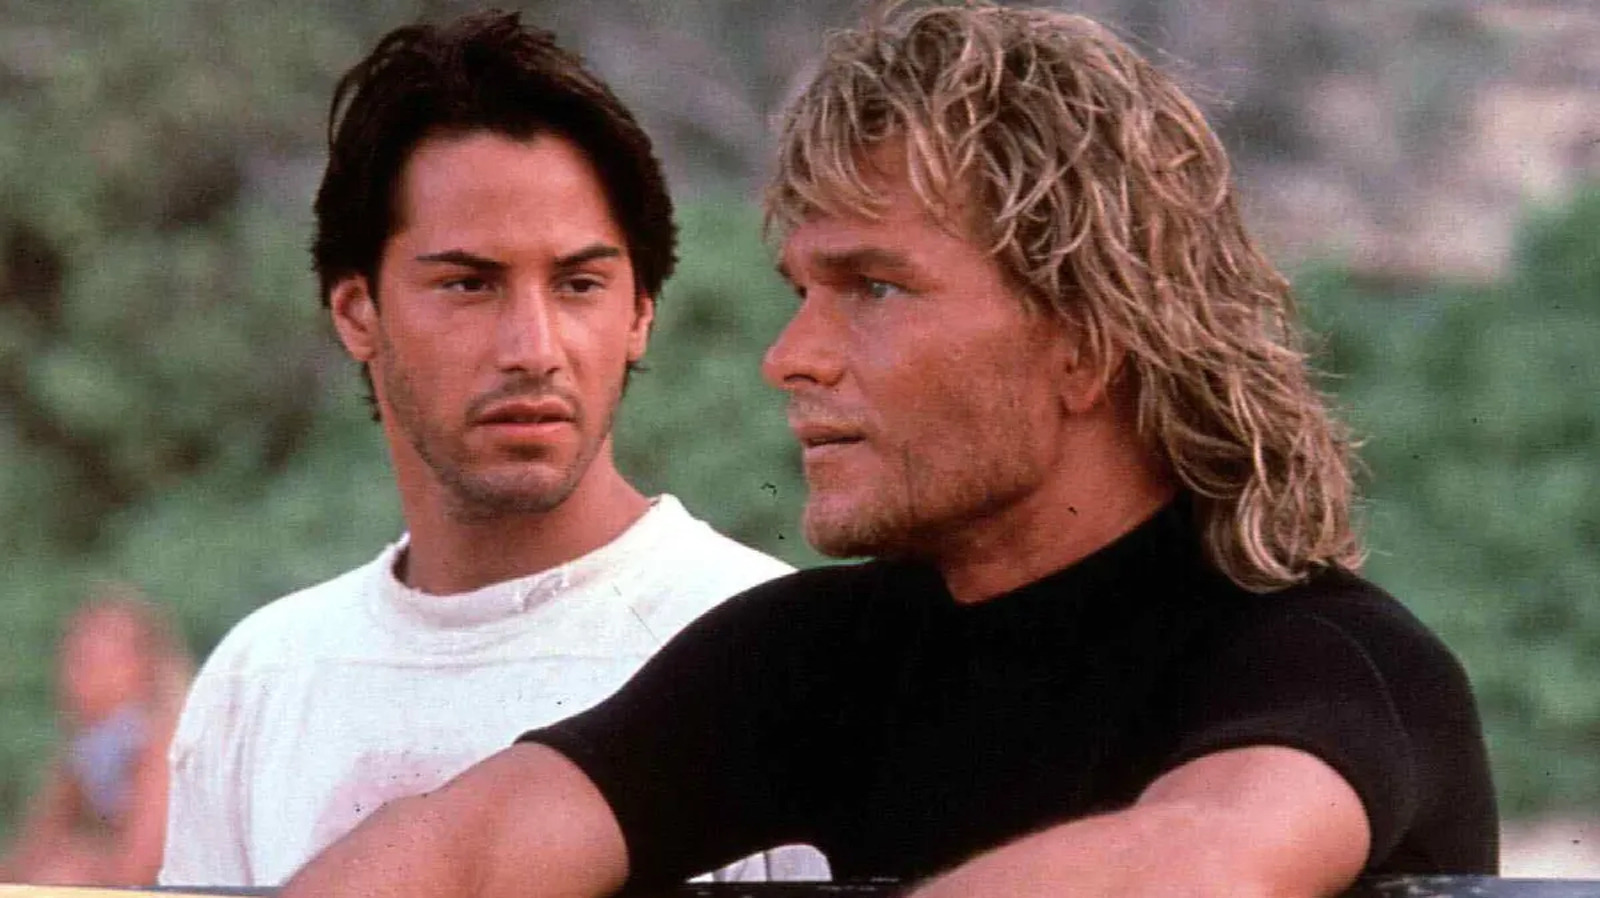 Patrick Swayze’s Best Role Almost Killed Him